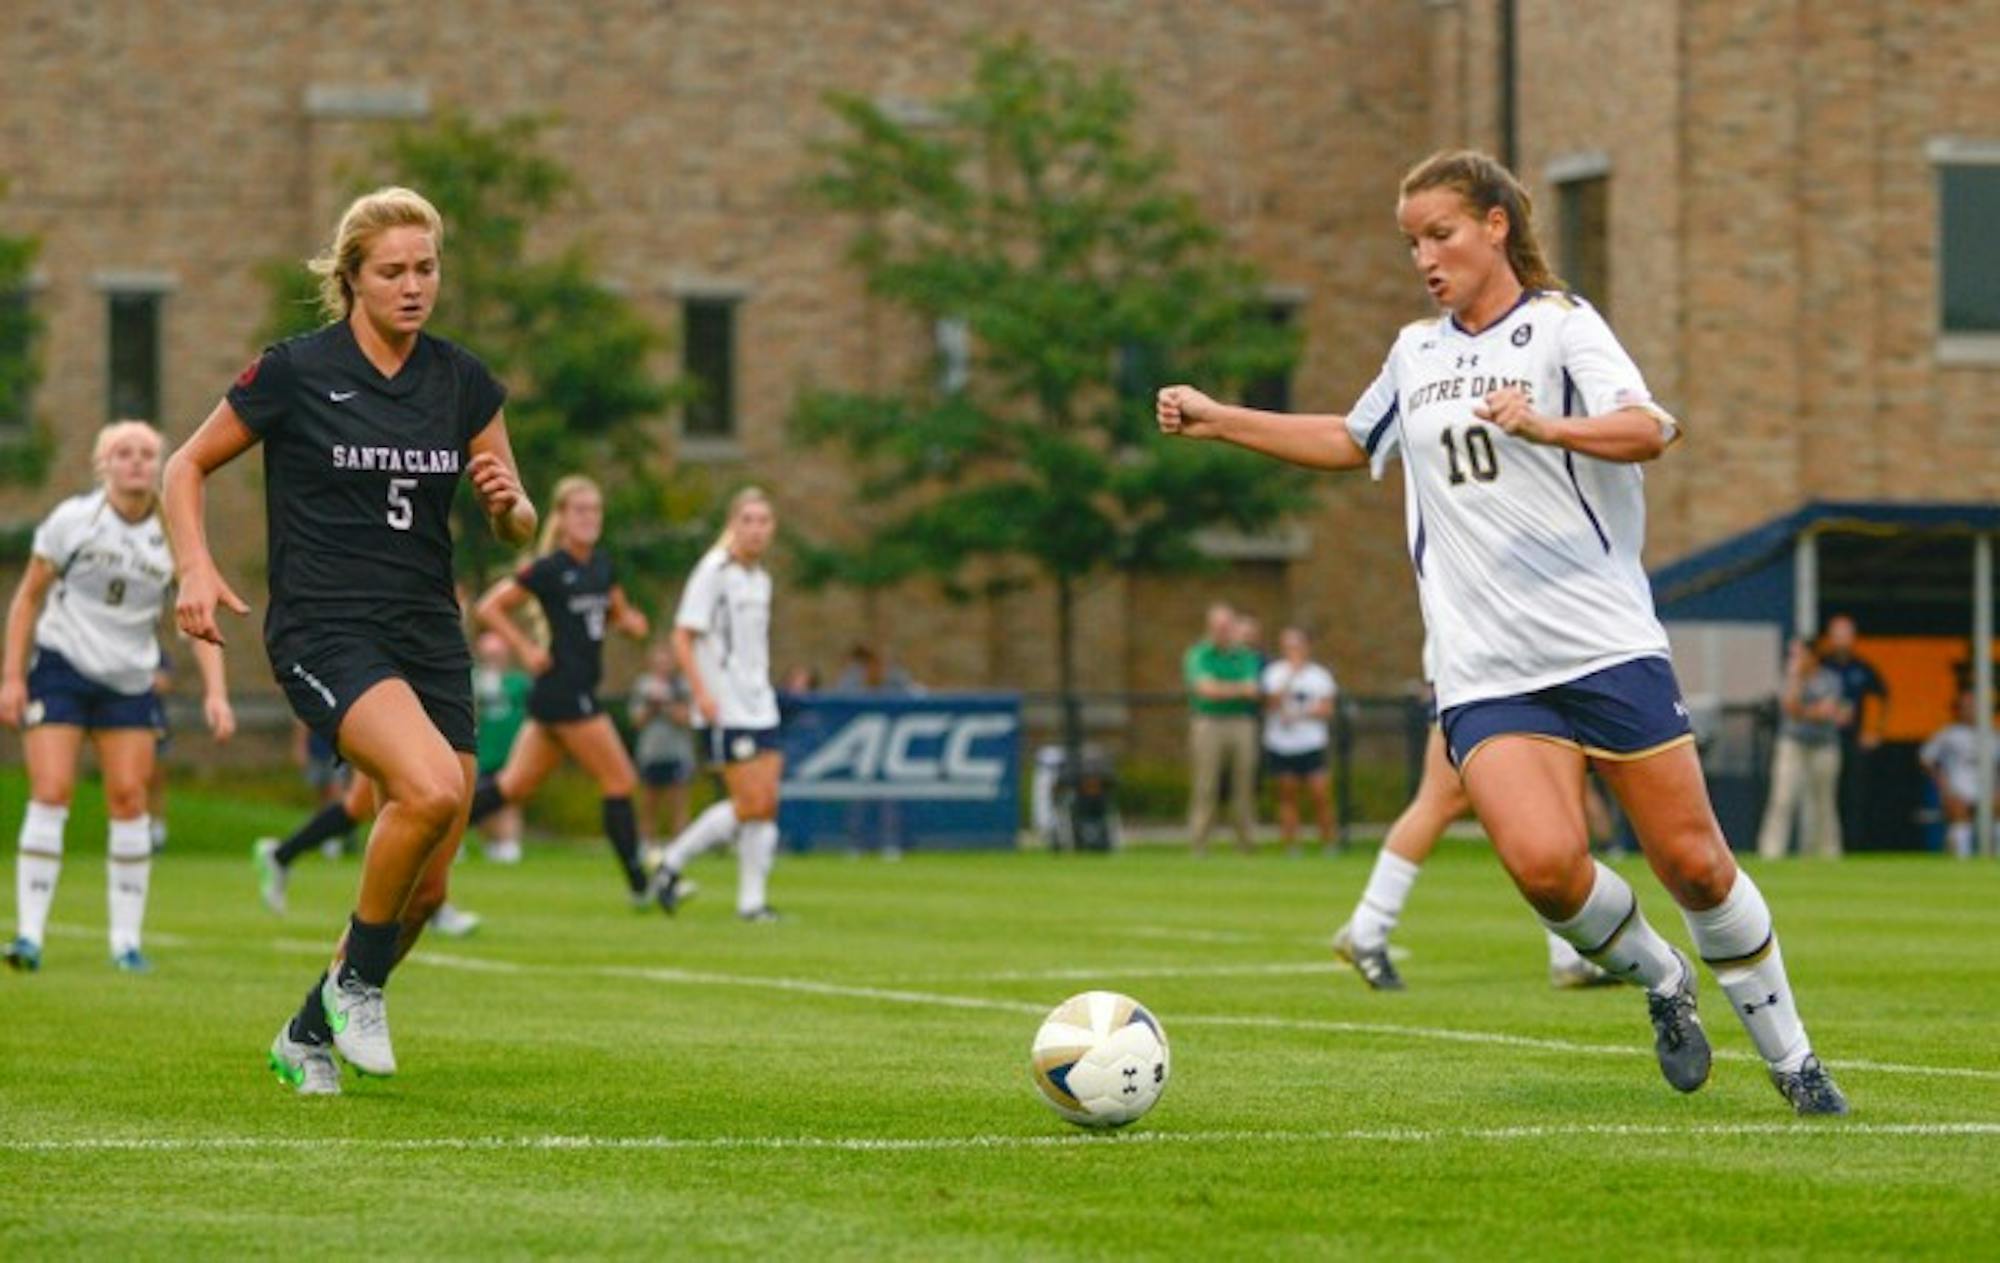 Irish senior midfielder Glory Williams prepares to take a touch during Notre Dame’s 2-1 win over Santa Clara on Friday.